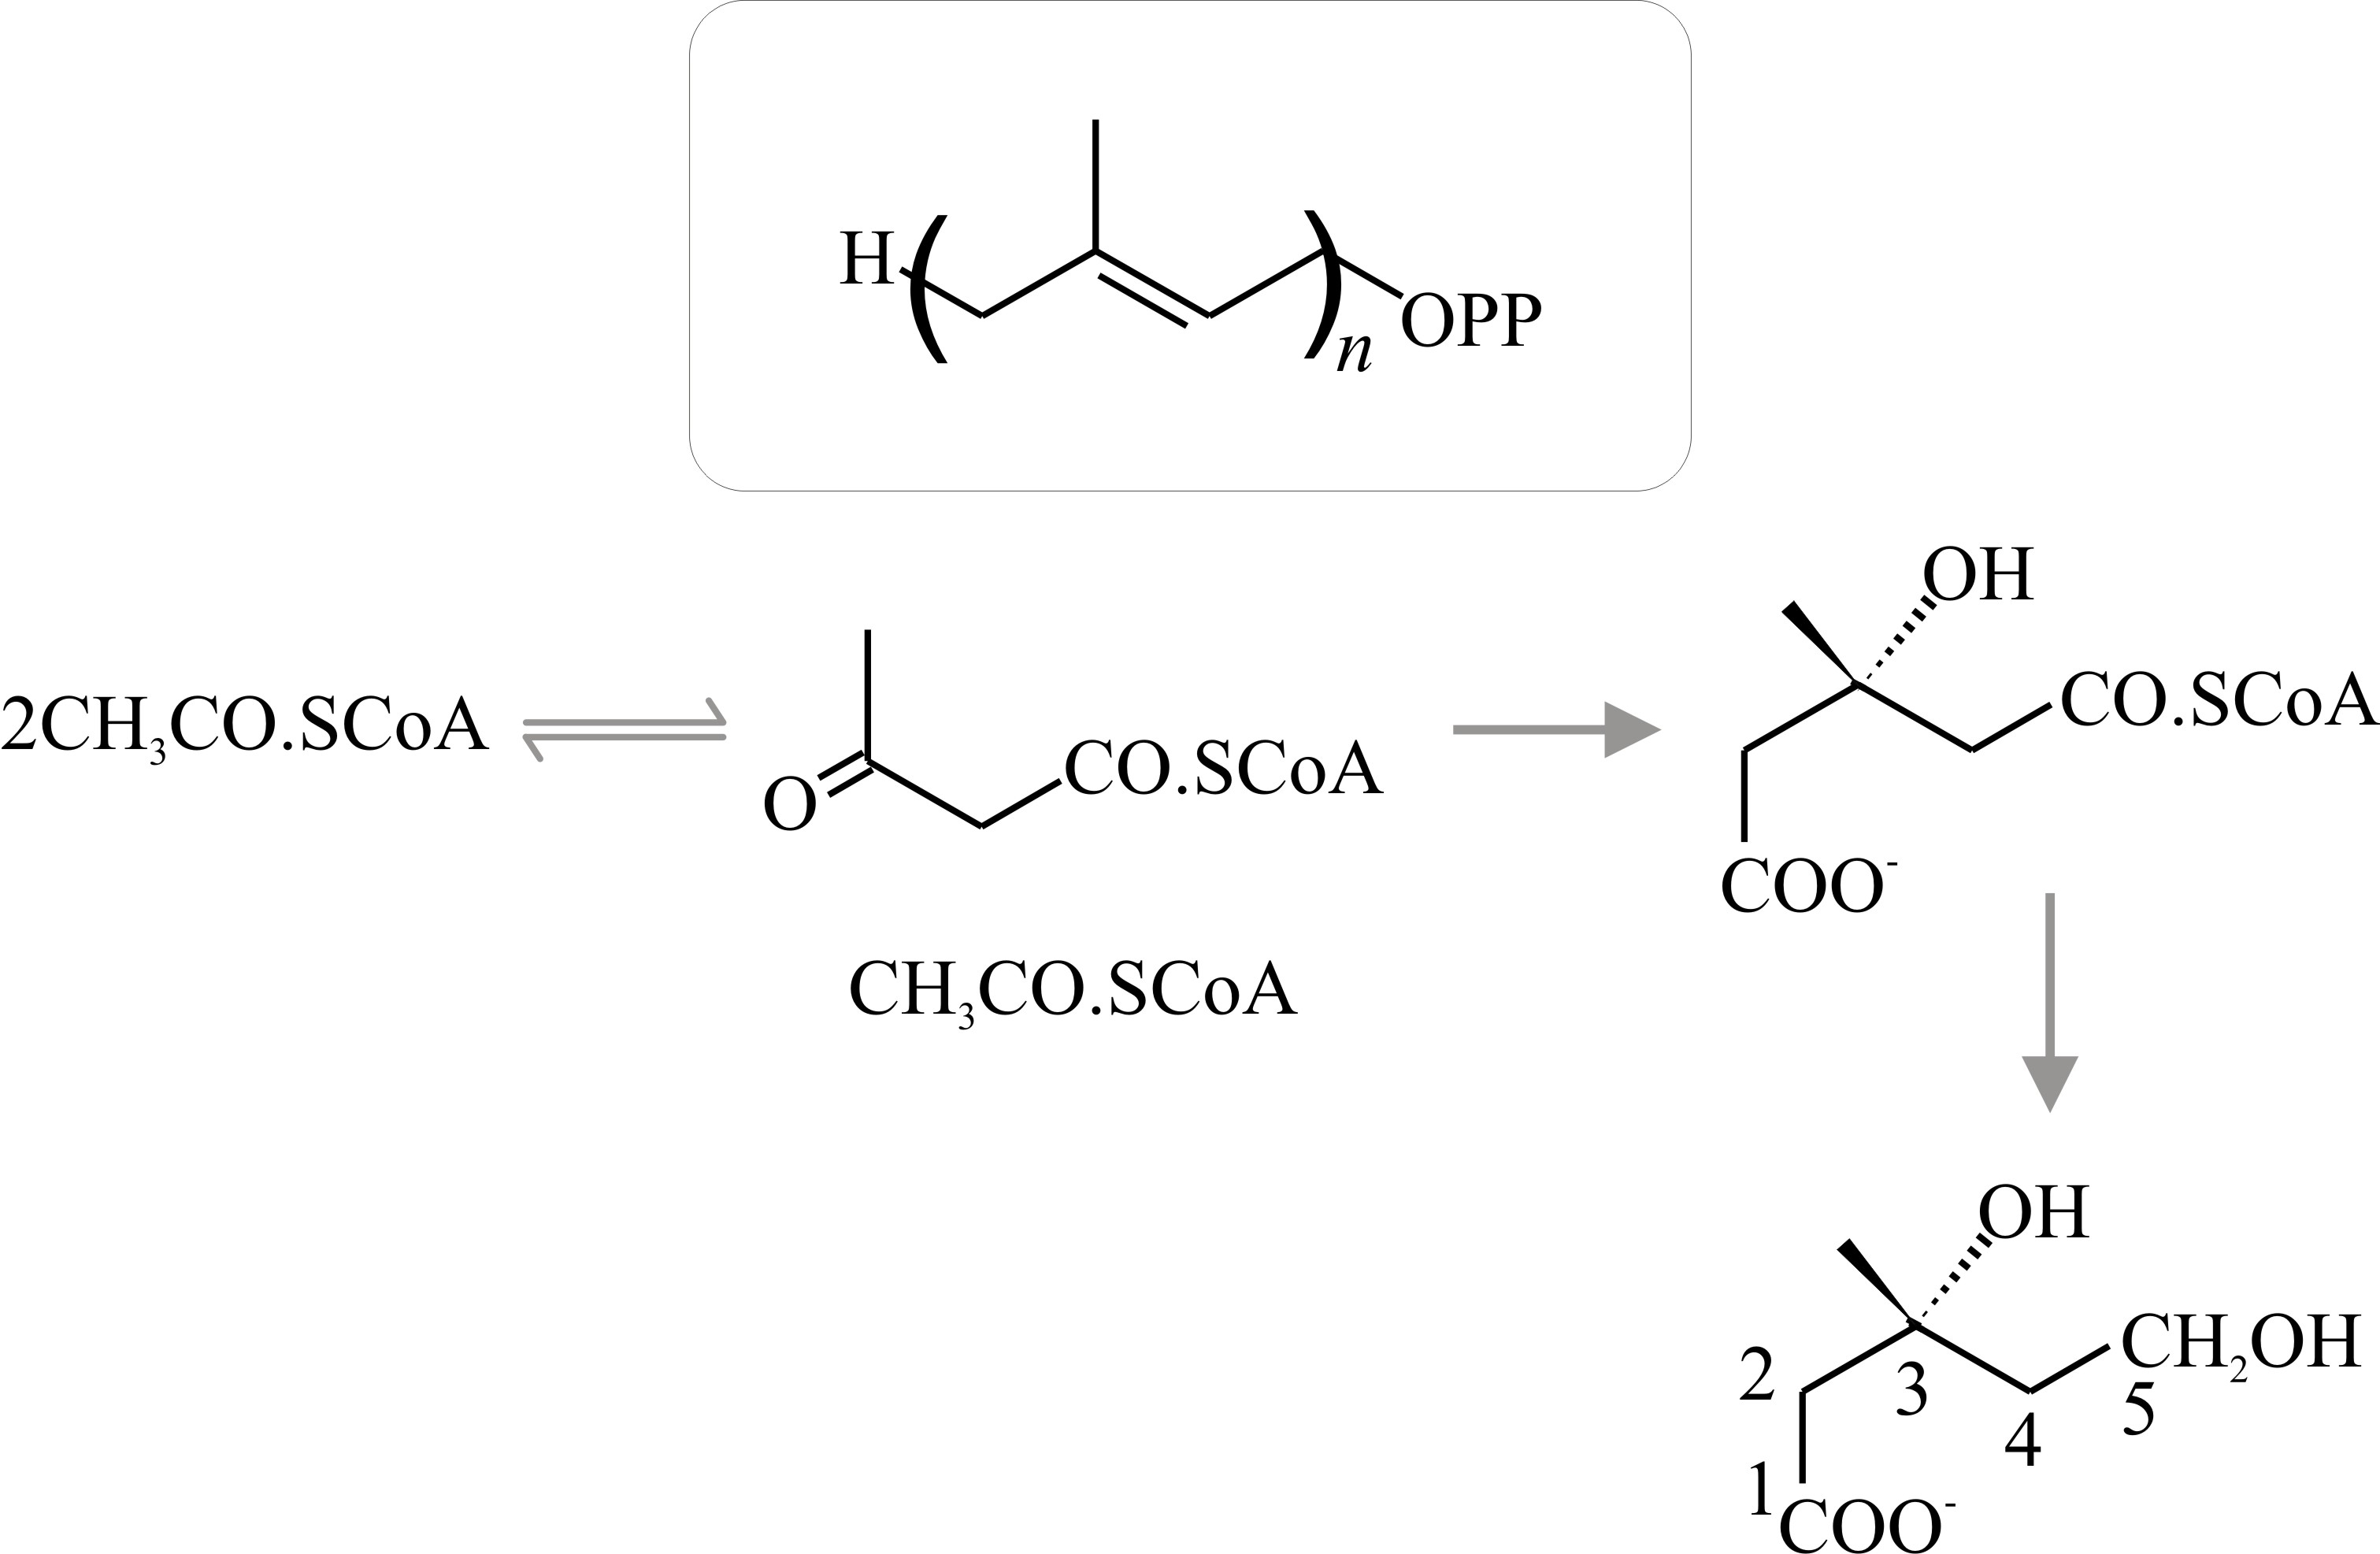 Derivation of terpenes from isoprene units